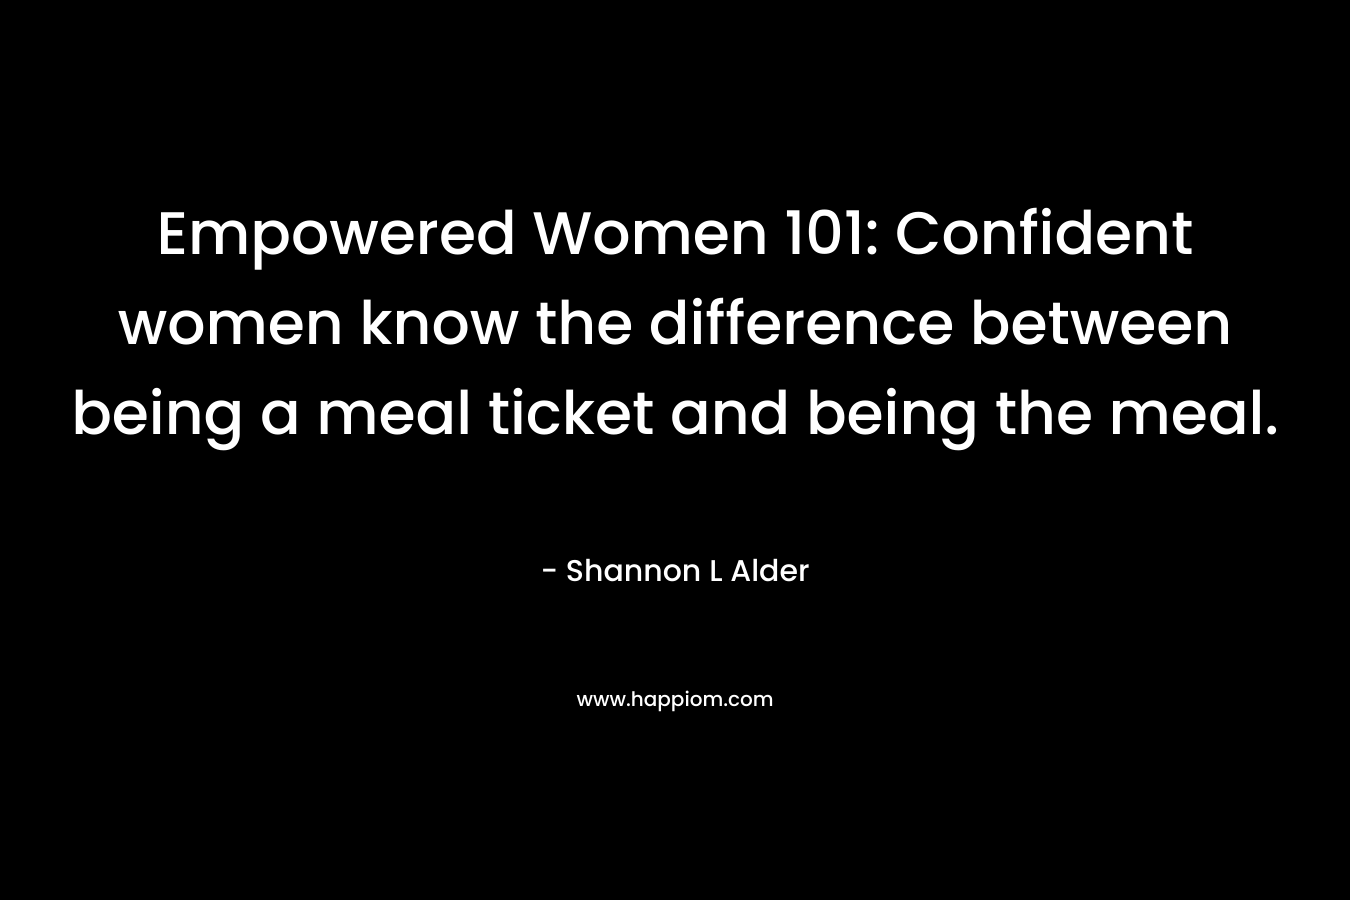 Empowered Women 101: Confident women know the difference between being a meal ticket and being the meal. – Shannon L Alder